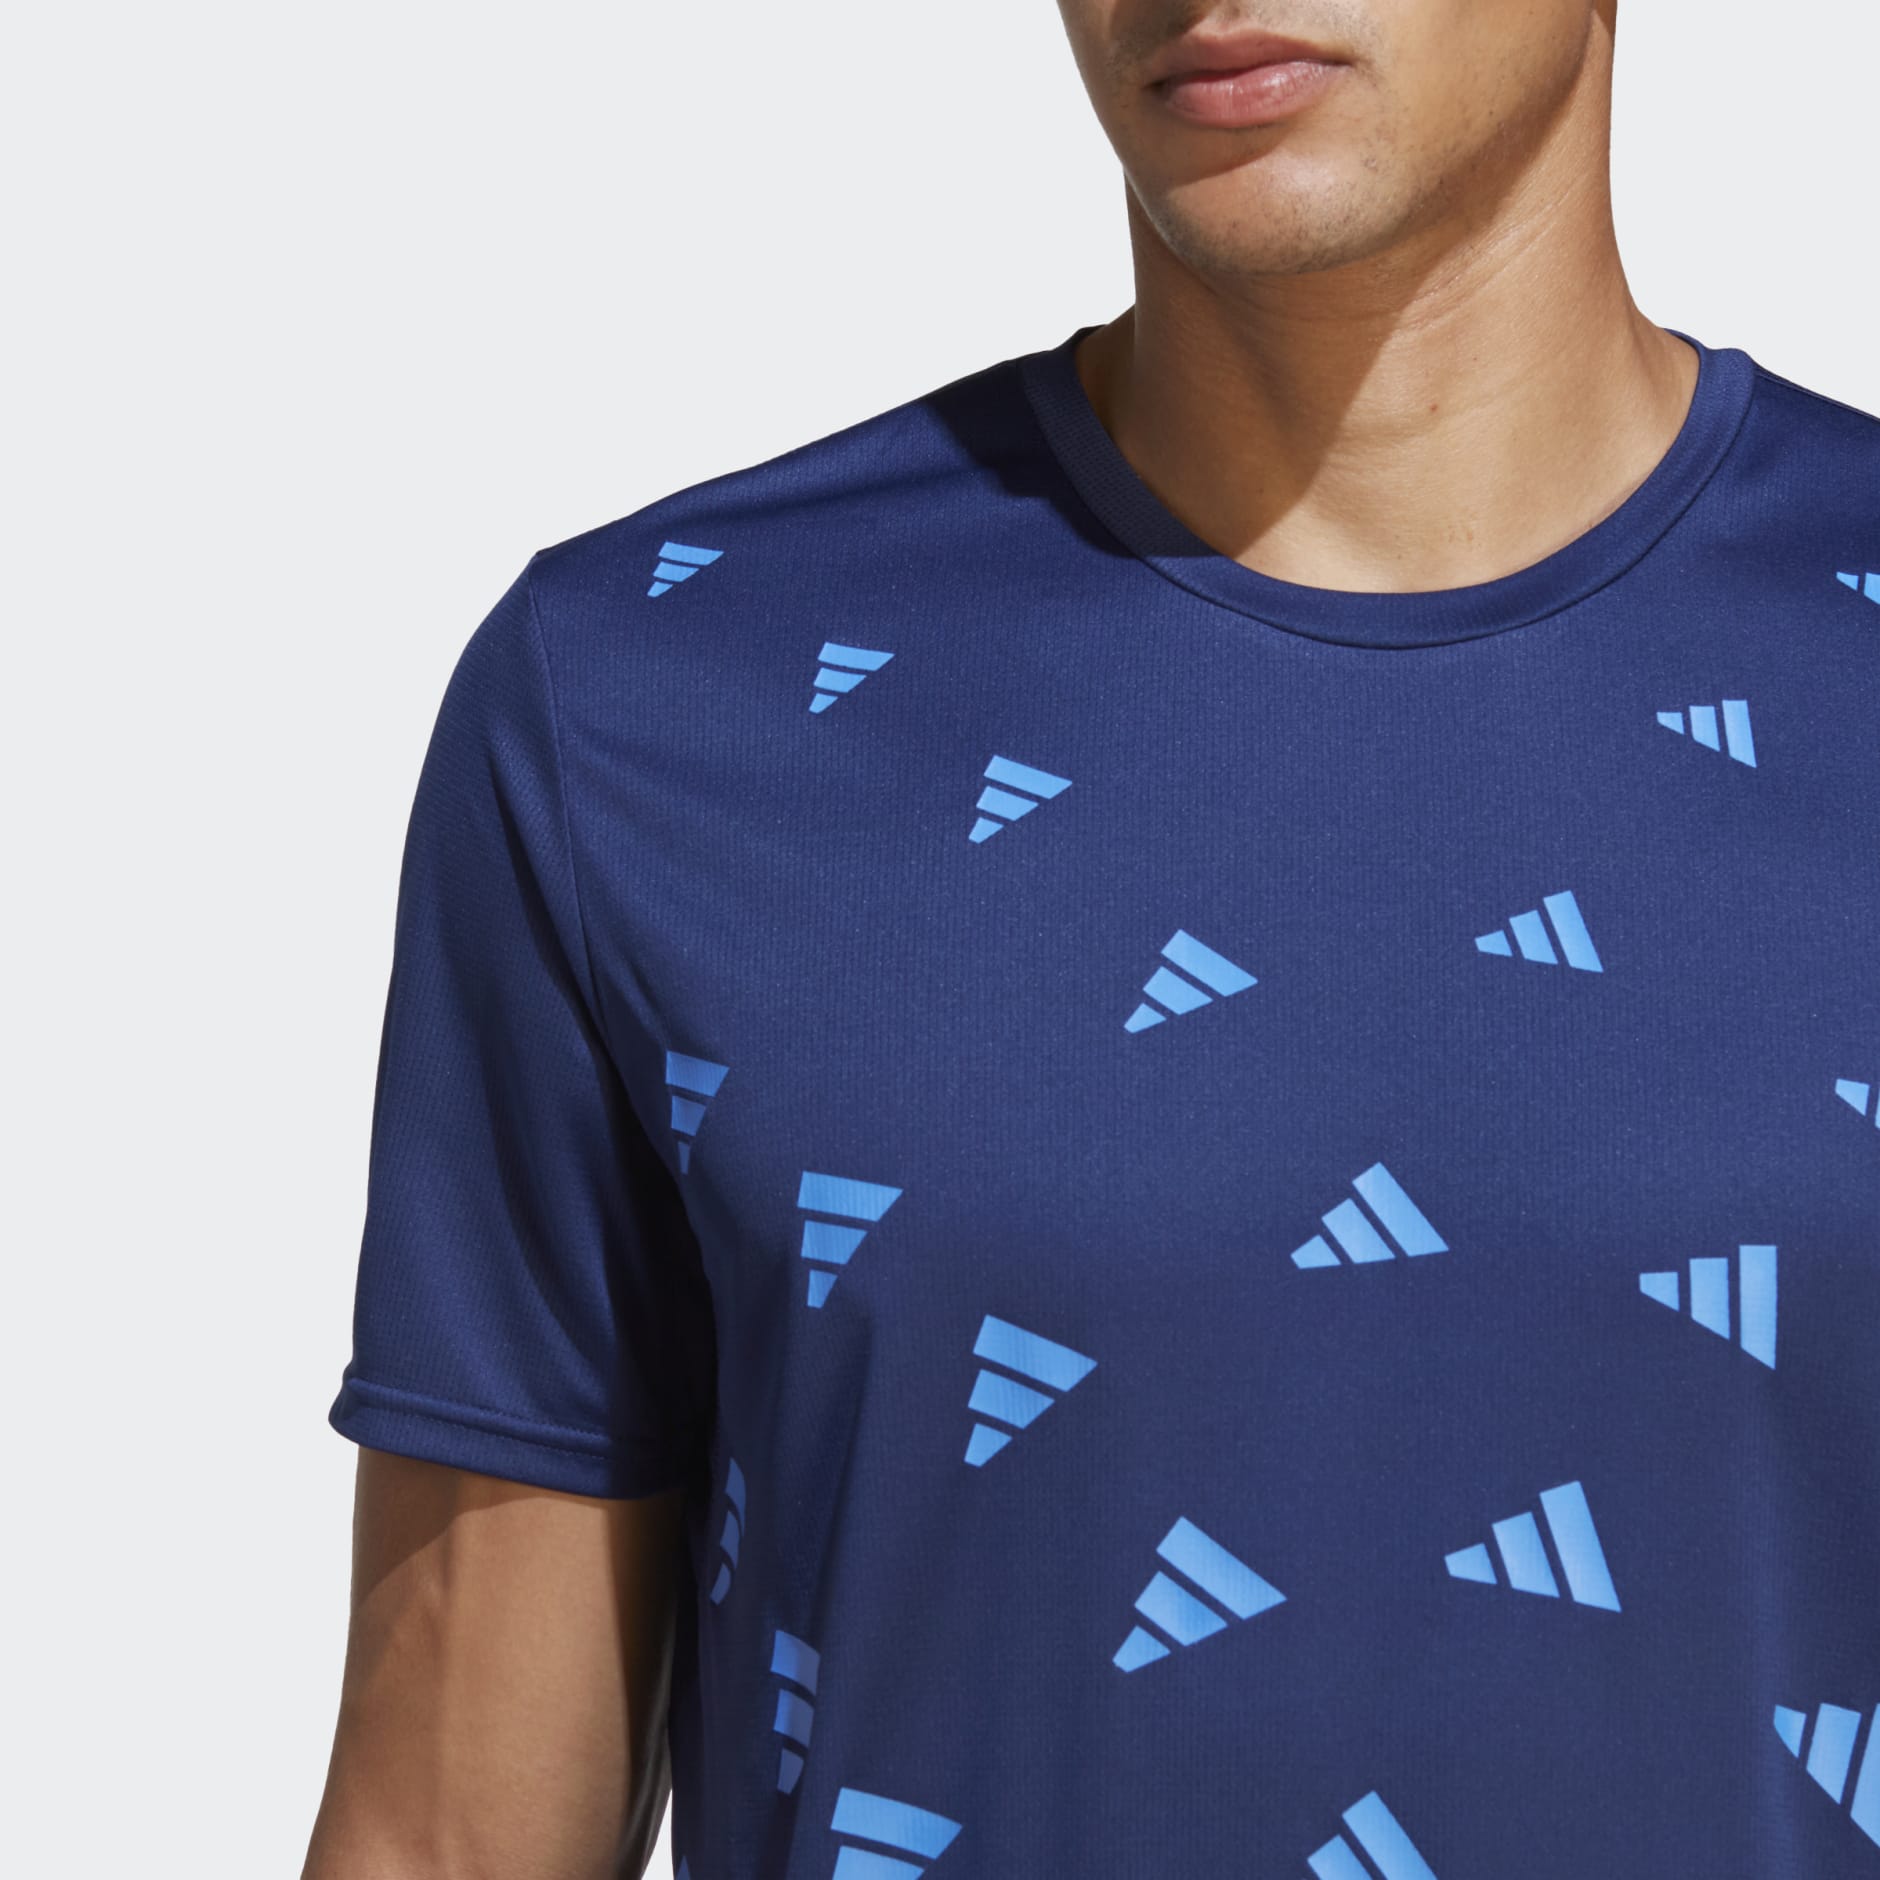 Clothing - Brand Love Graphic Tee - Blue | adidas South Africa